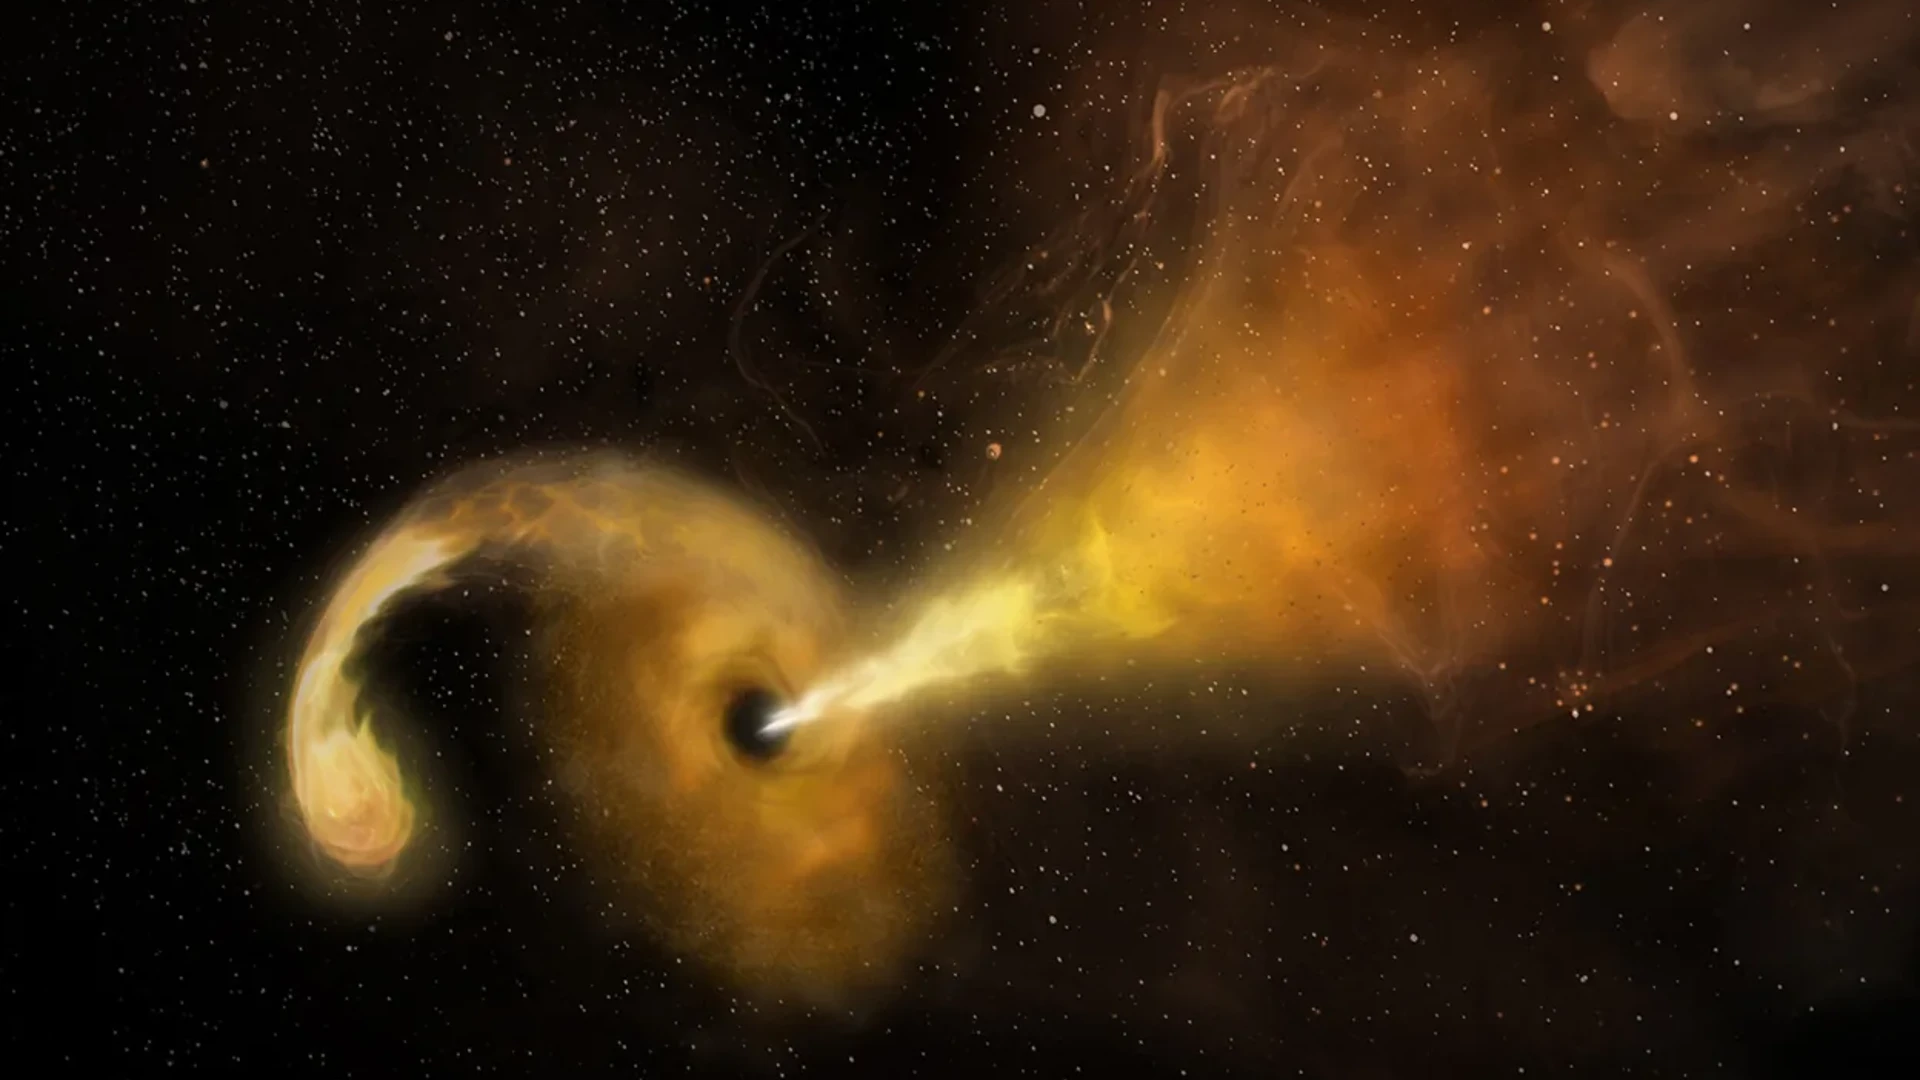 Astronomers Discover A Hidden Treasure Of Massive Black Hole; “We’re Still Pinching Ourselves”